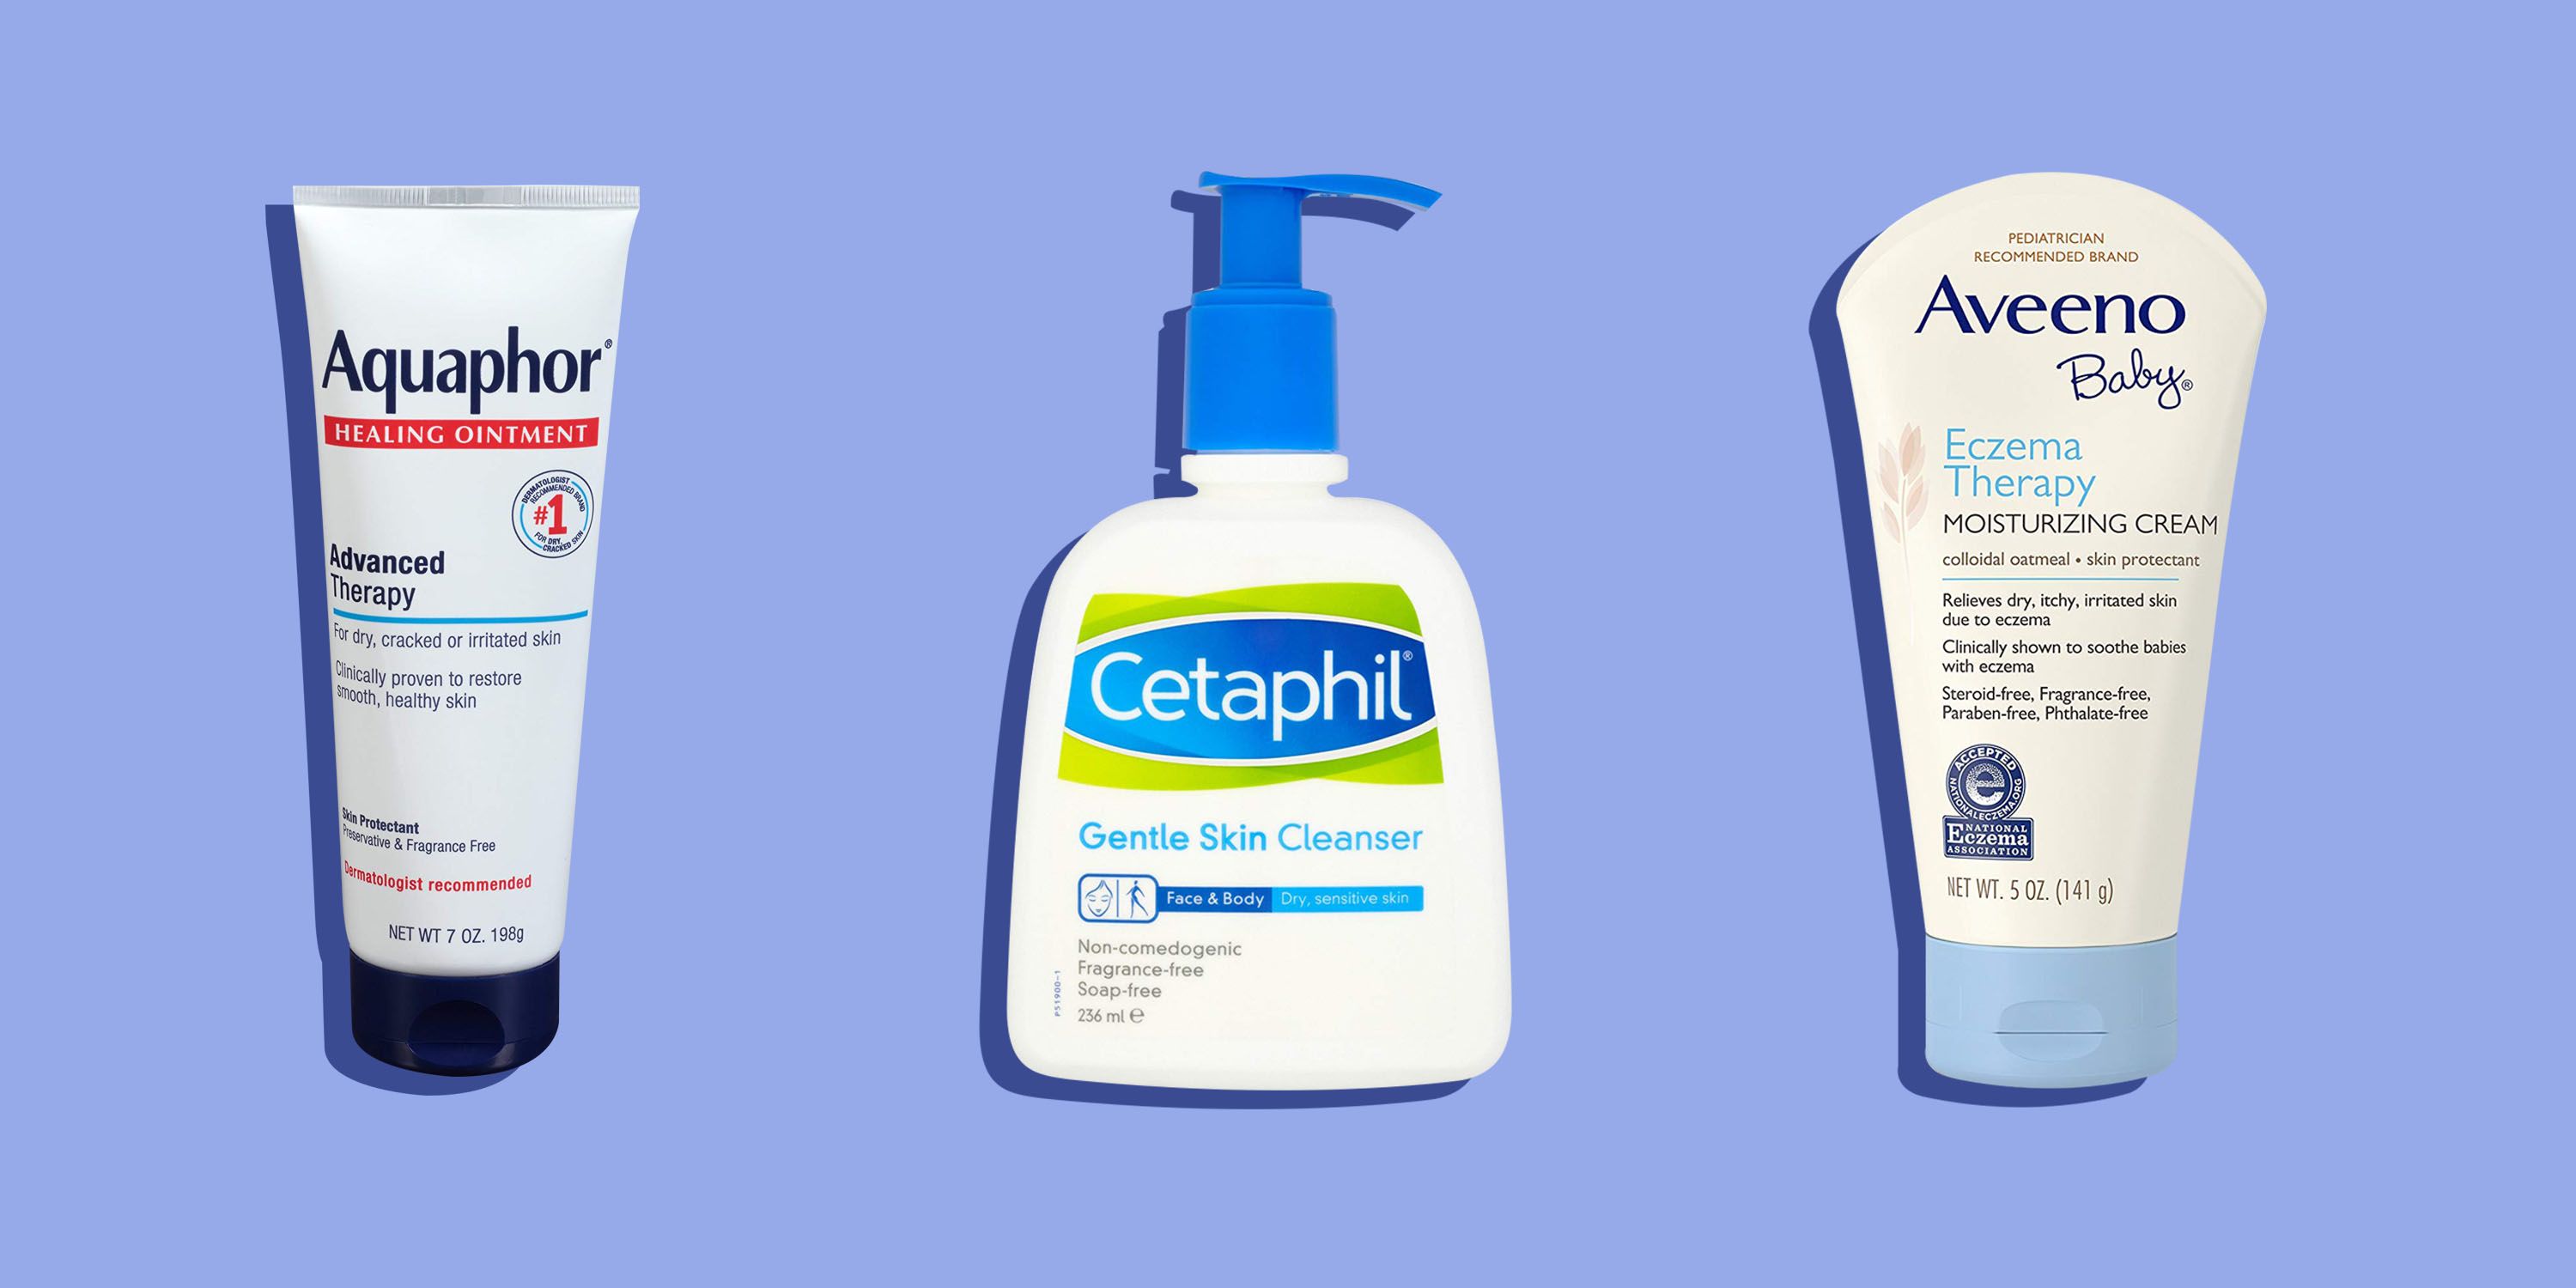 Best Products Treat Eczema on Face - Face Wash, Cream, & More